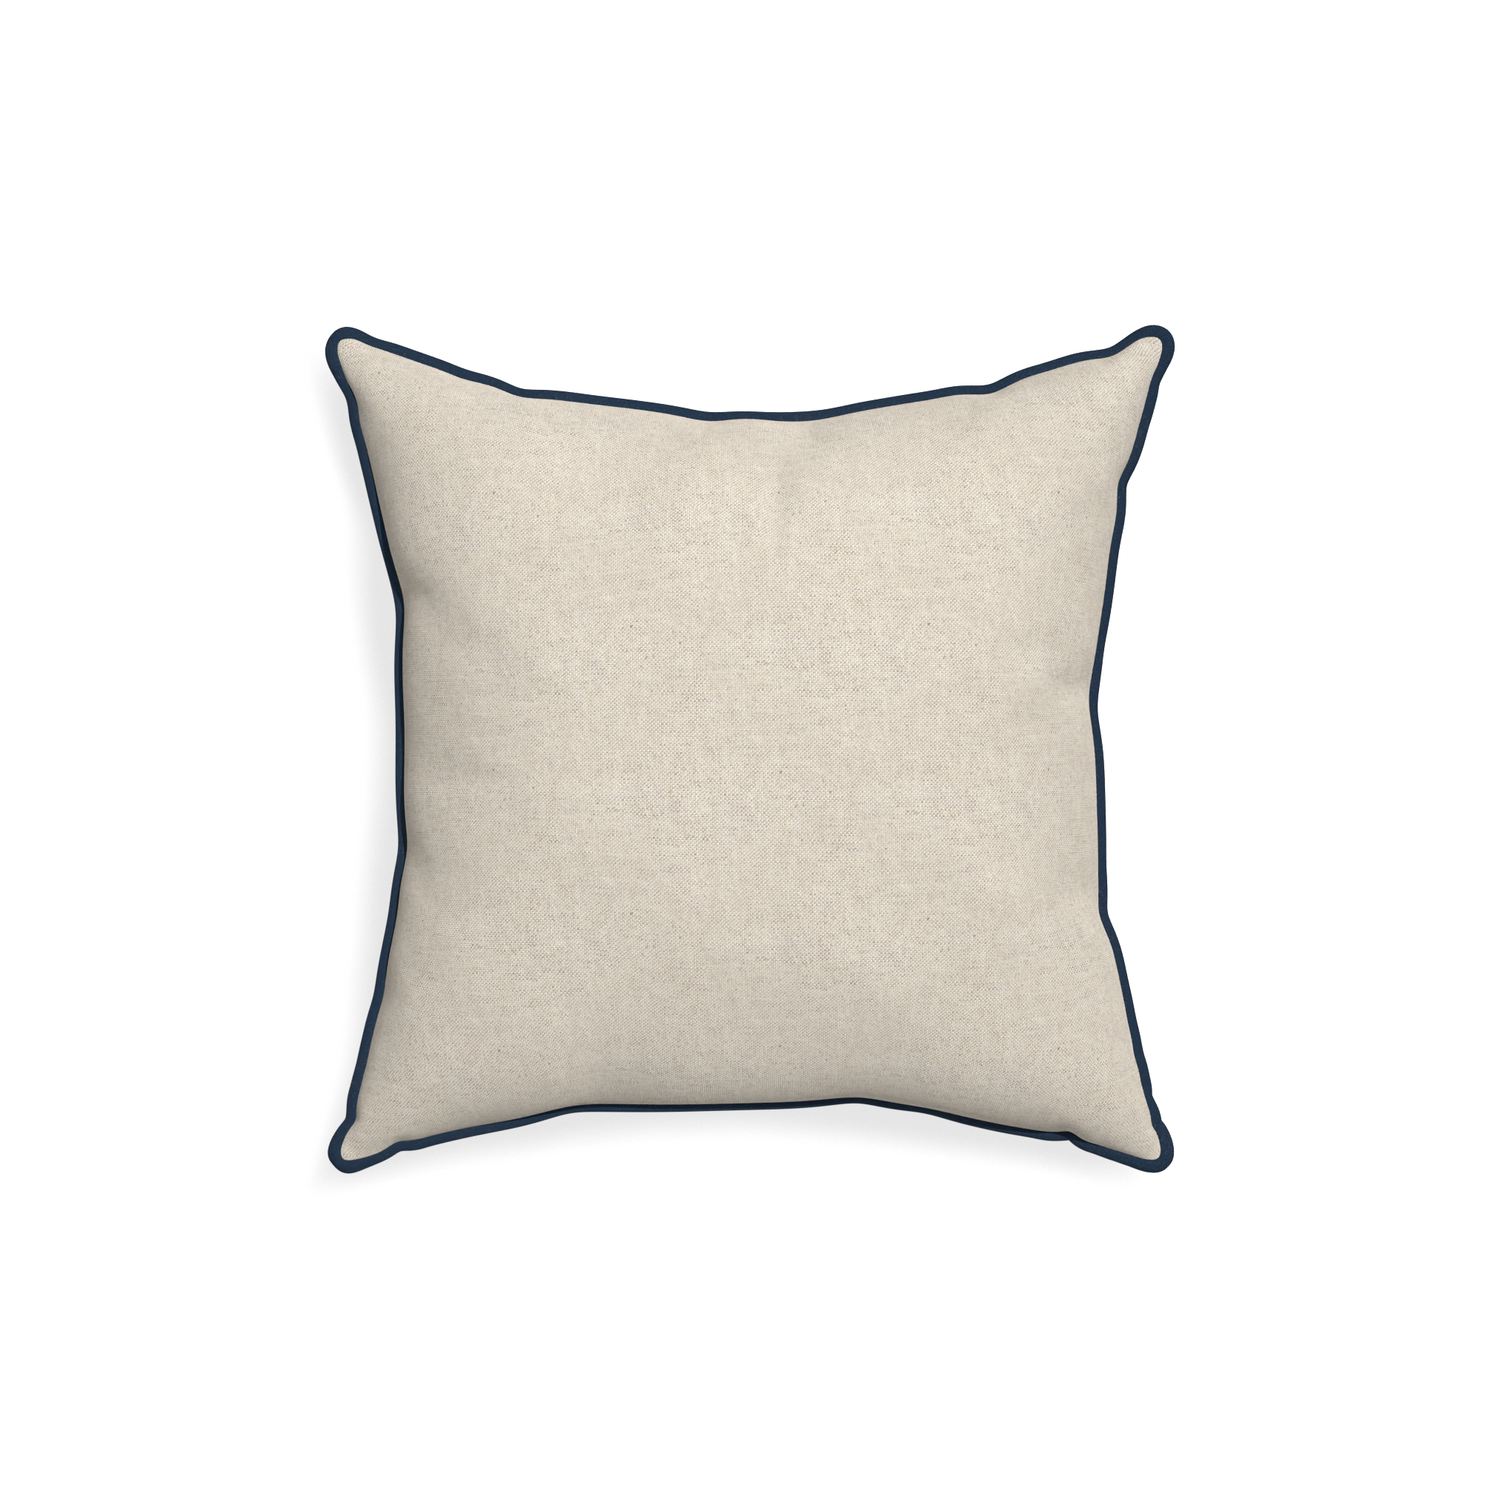 18-square oat custom light brownpillow with c piping on white background